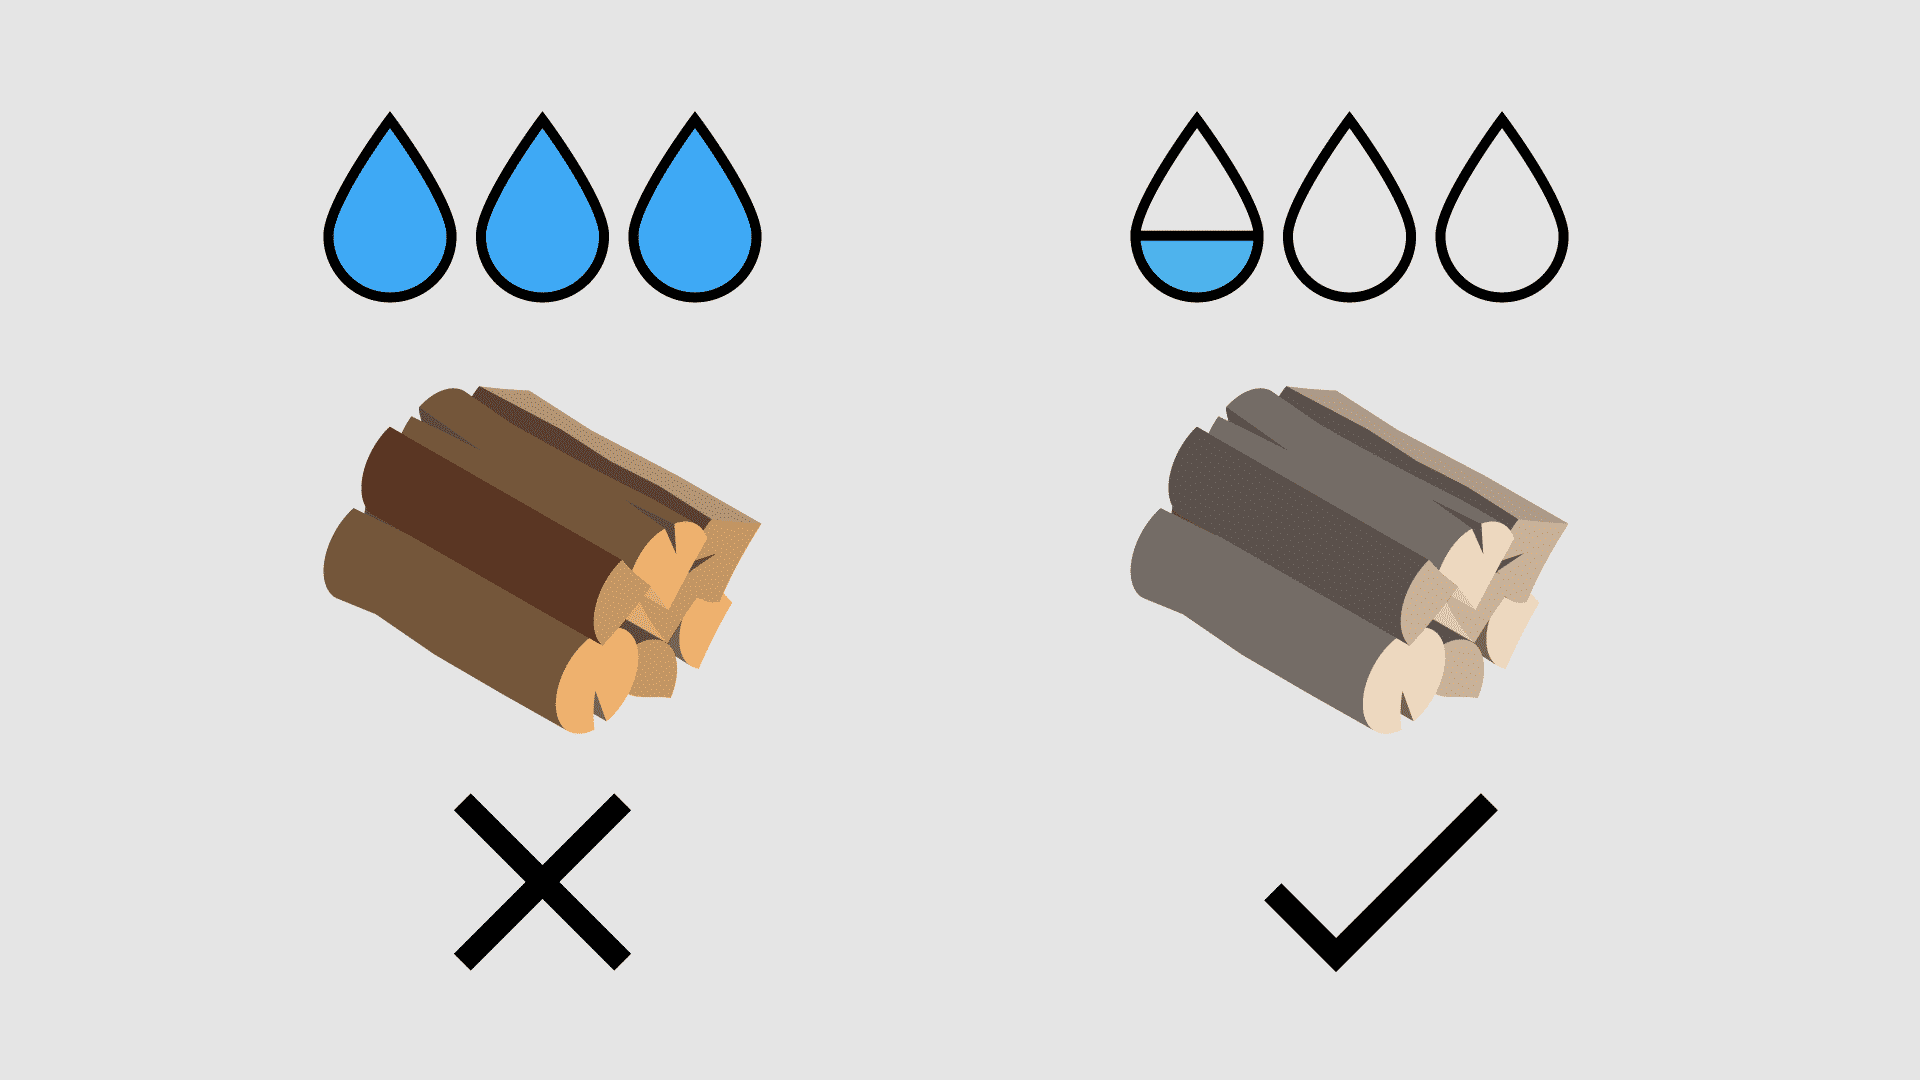 an illustration of the best type of wood to use inside a campervan wood-burning stove